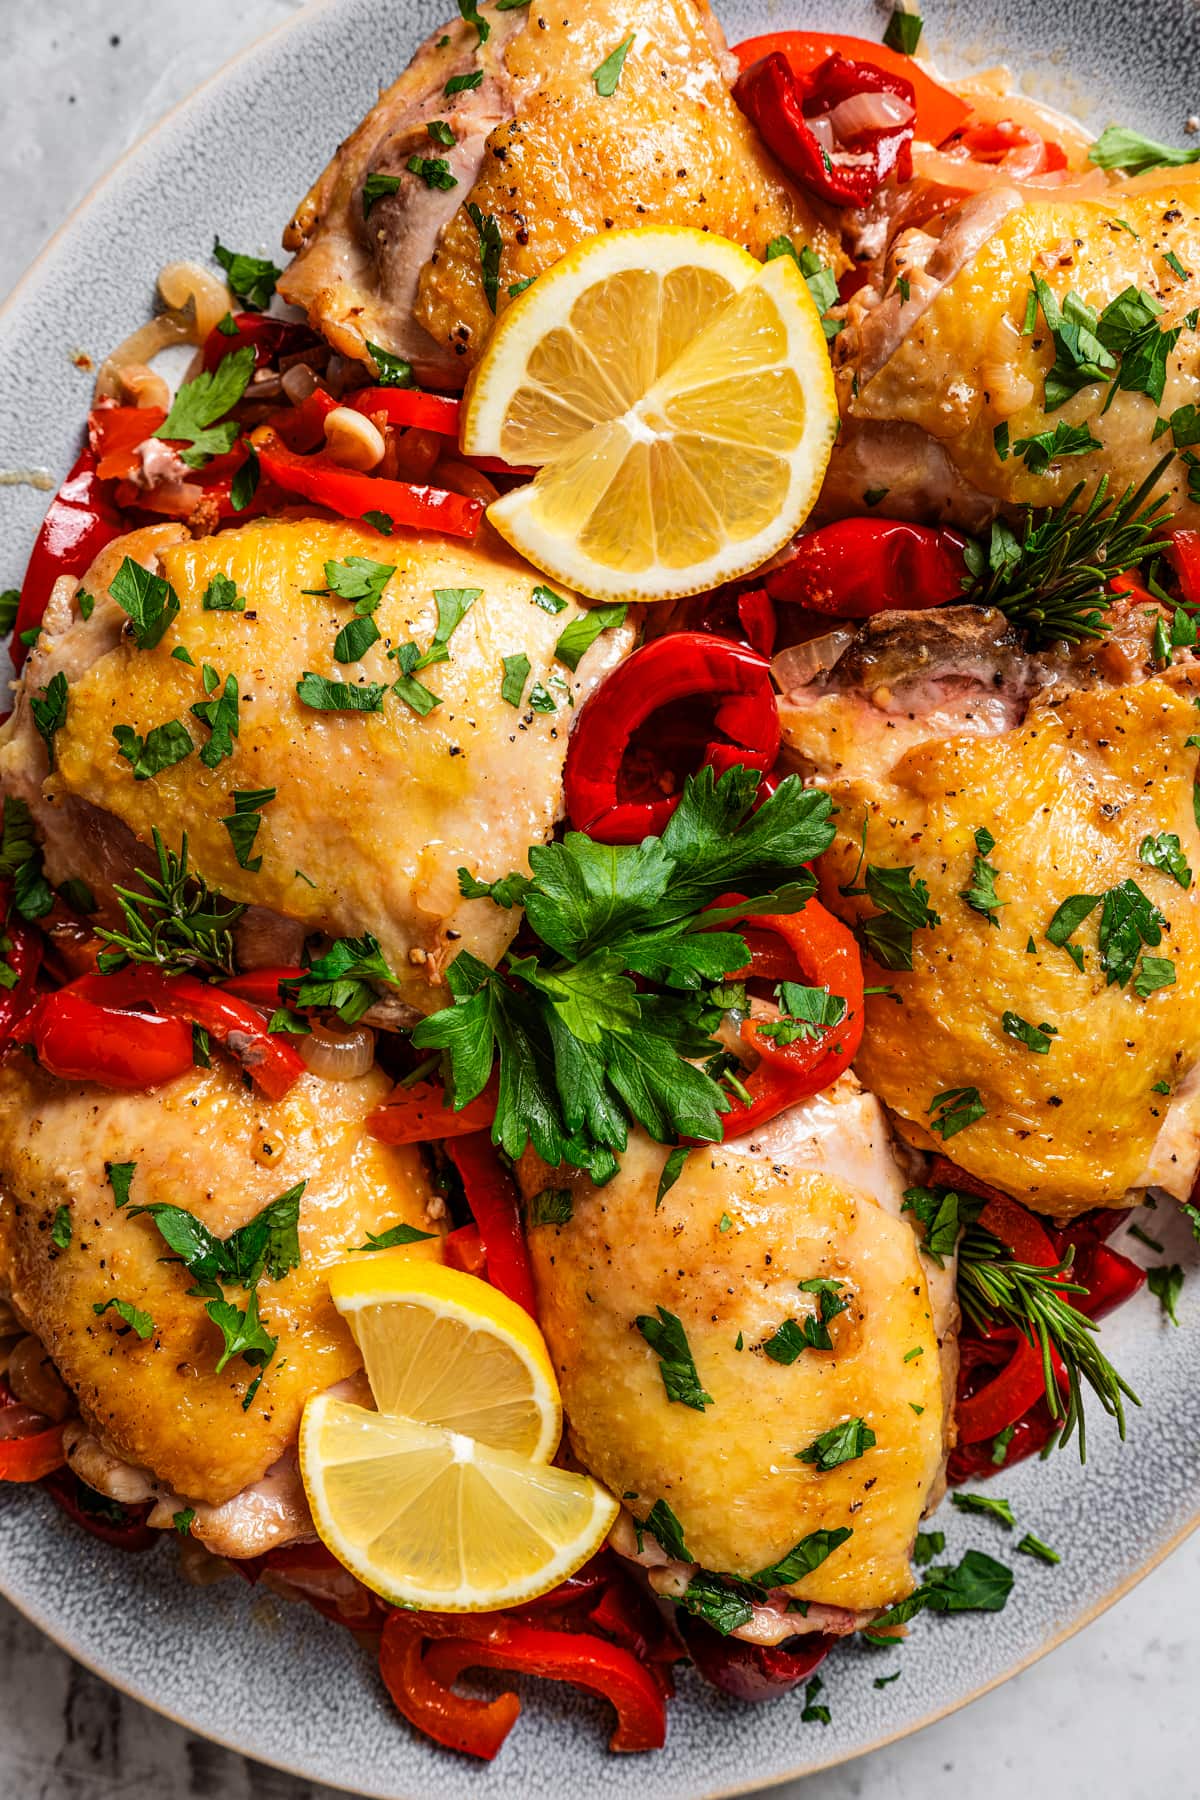 Chicken thighs served on a platter with julienne cut peppers, slices of lemons, and a garnish of parsley.